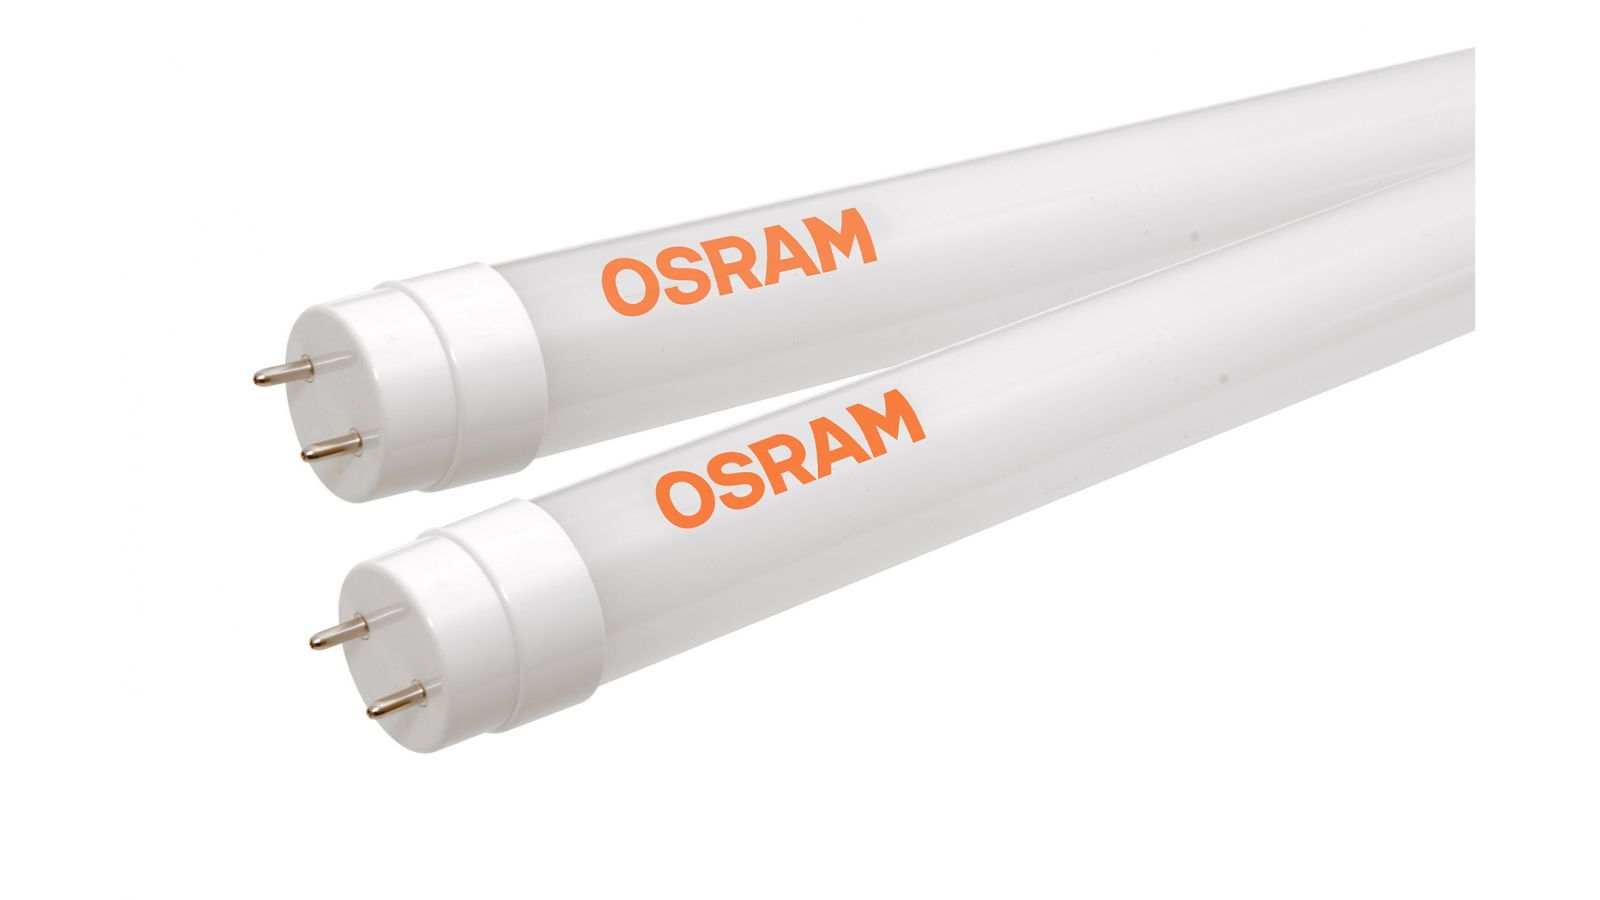 OSRAM SubstiTUBE® IS LED T8 lamps